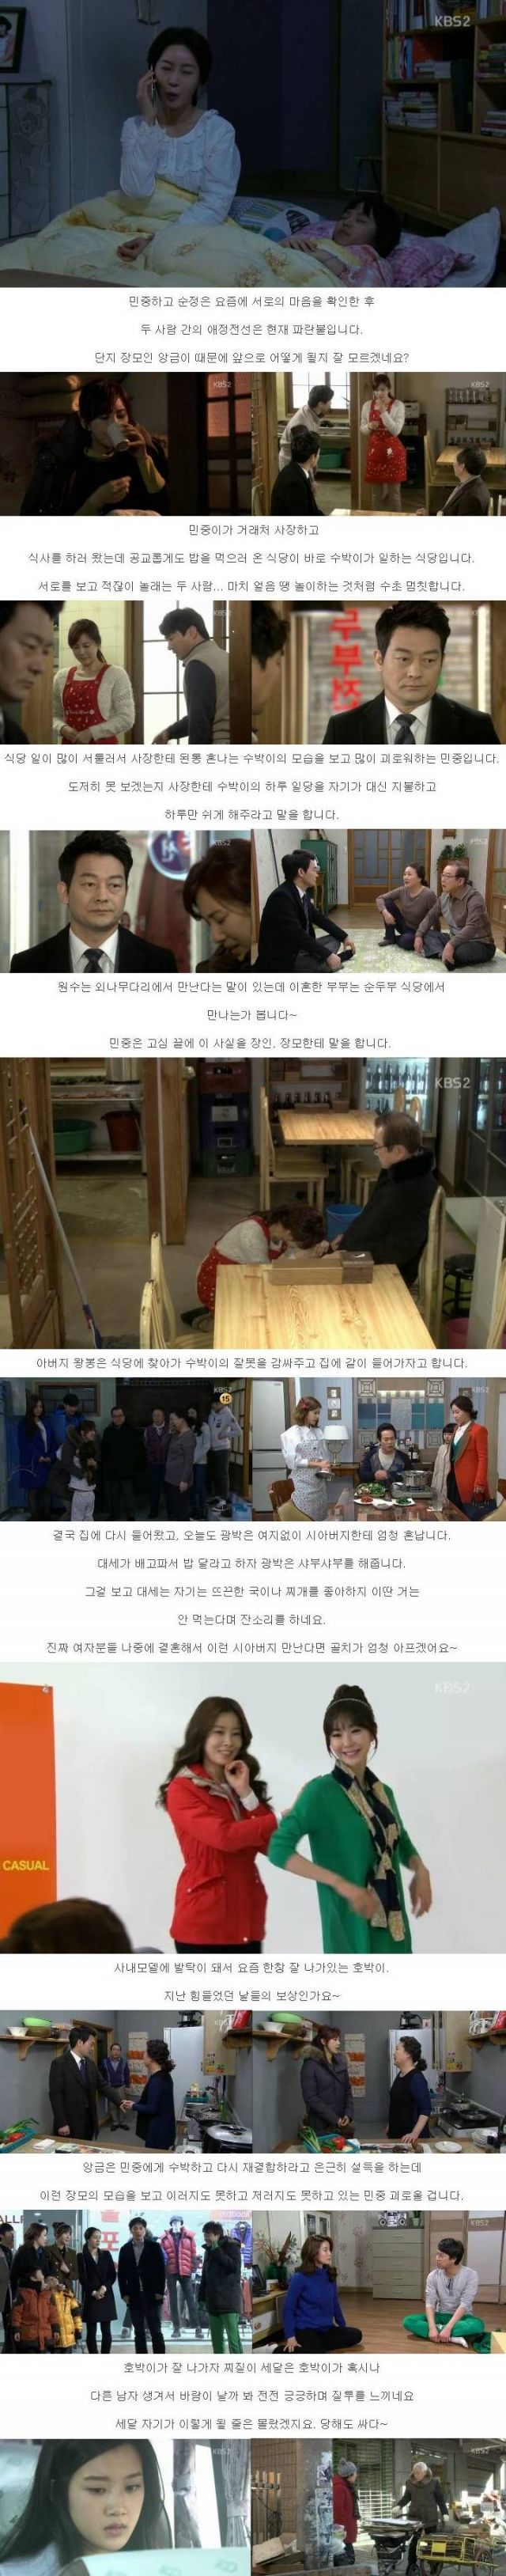 episodes 43 and 44 captures for the Korean drama 'The Wang Family'